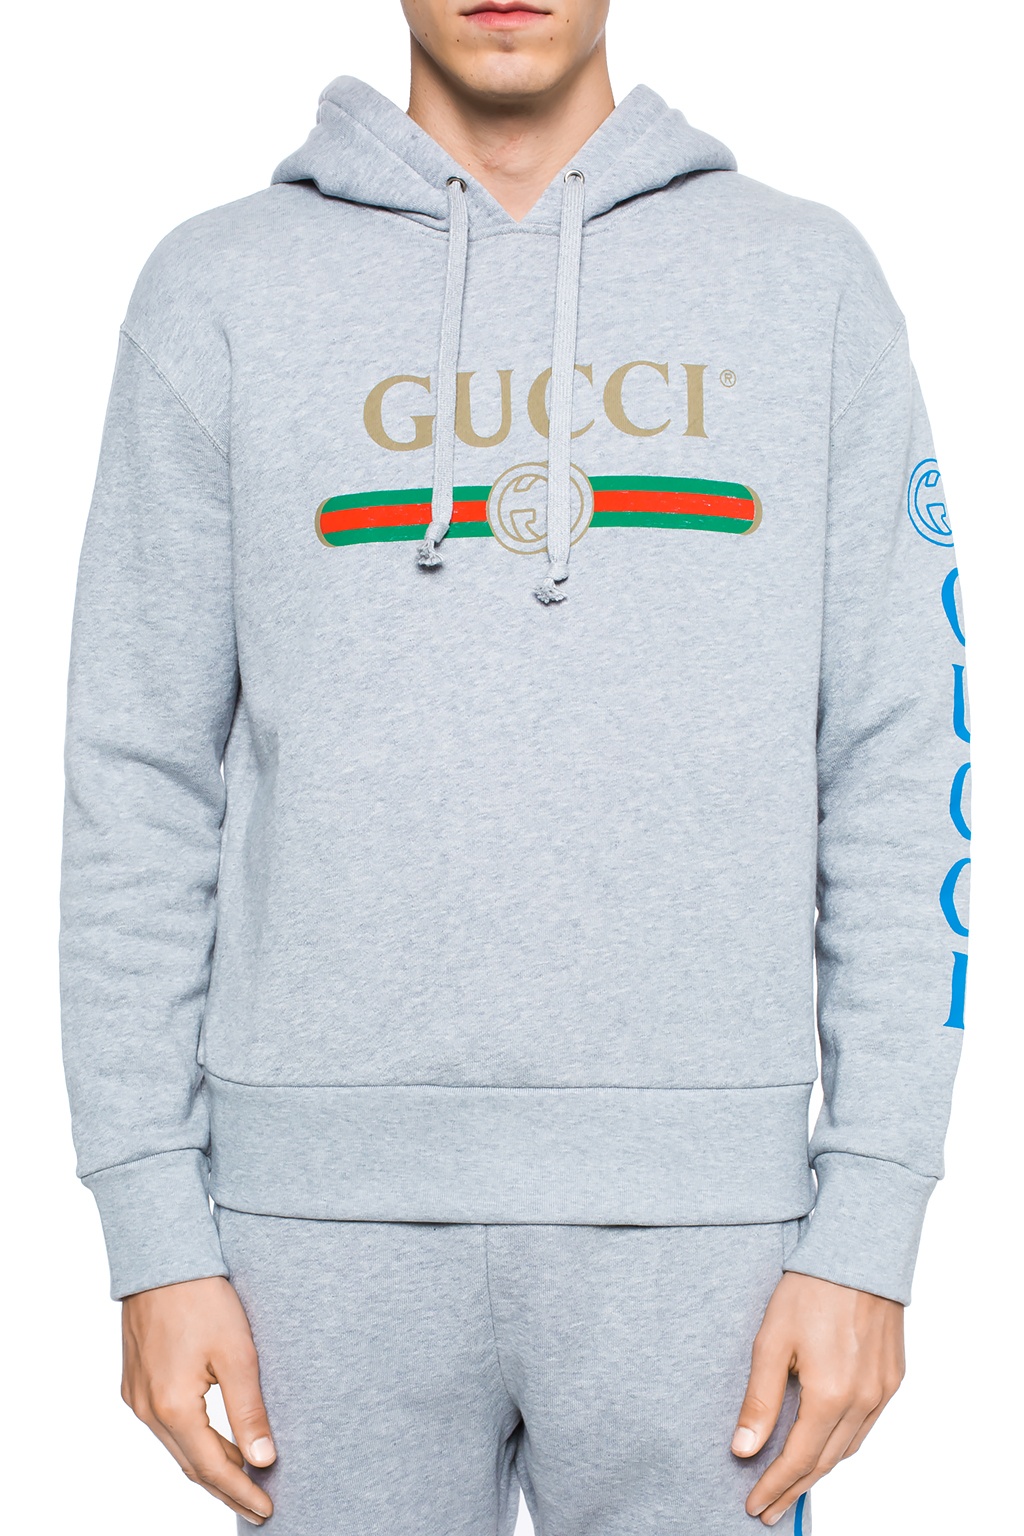 Gucci Snake Unisex Hoodie For Men Women Luxury Brand Clothing Clothes  Outfit 59 Hdlux-213 #clothing, by Cootie Shop